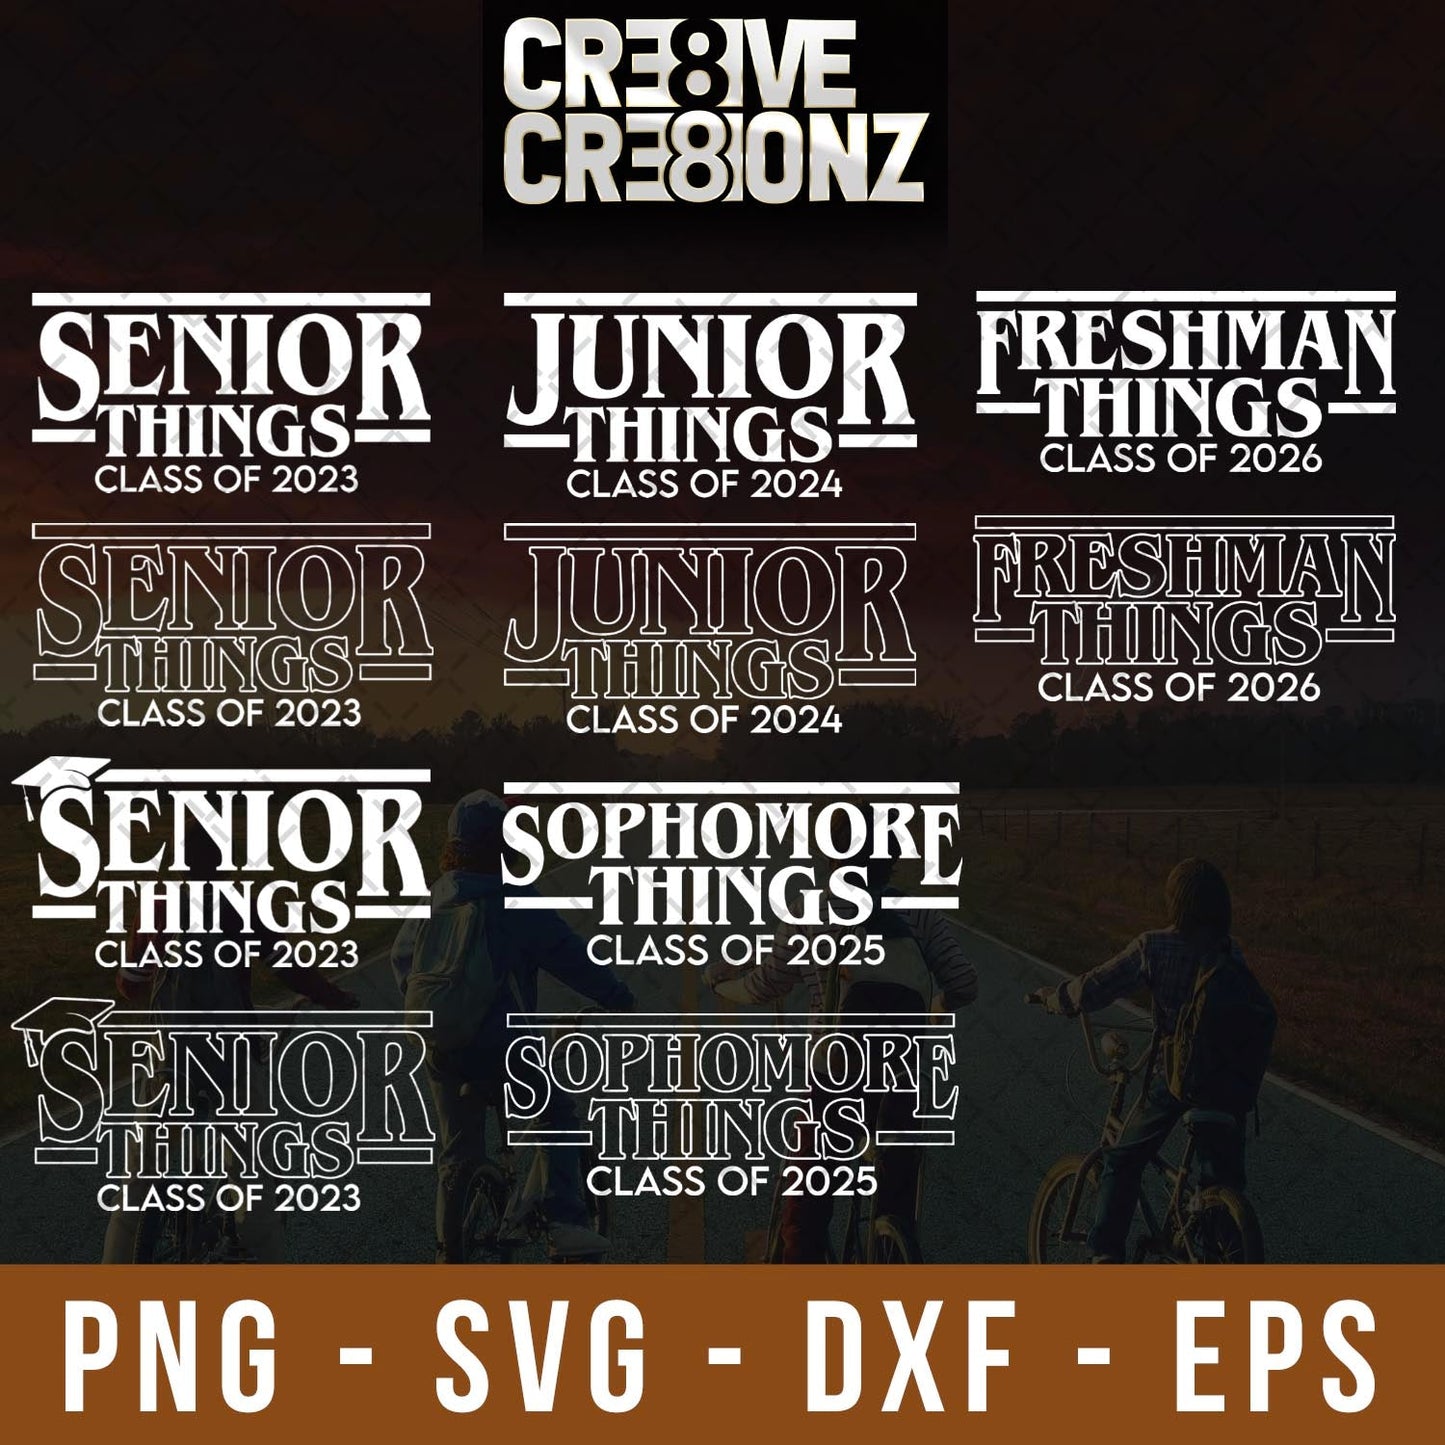 Class Things Bundle SVG - Cre8ive Cre8ionz